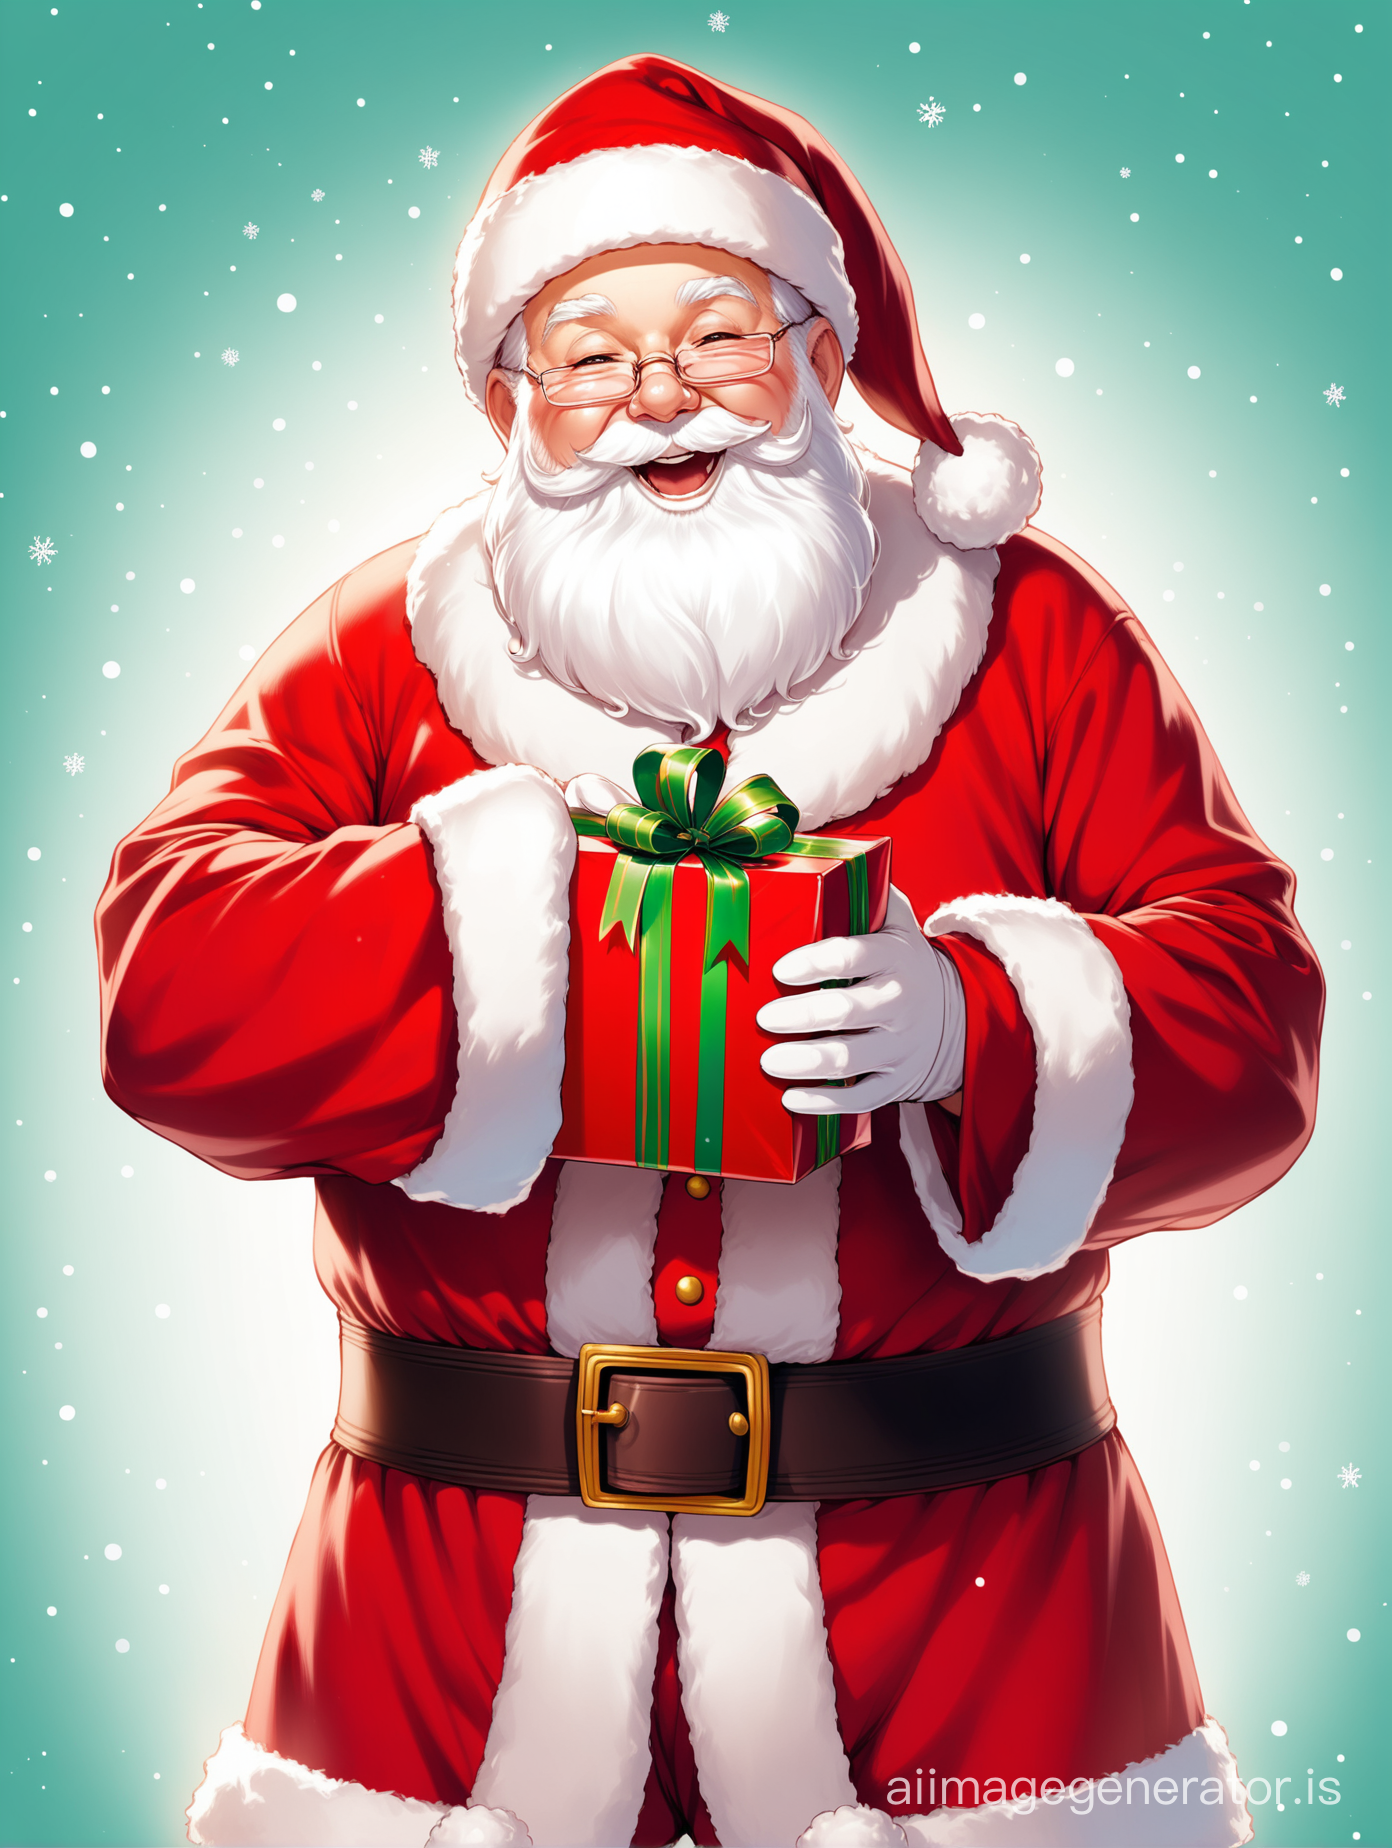 a picture of a jolly Santa clause holding a present and his whole body is visible